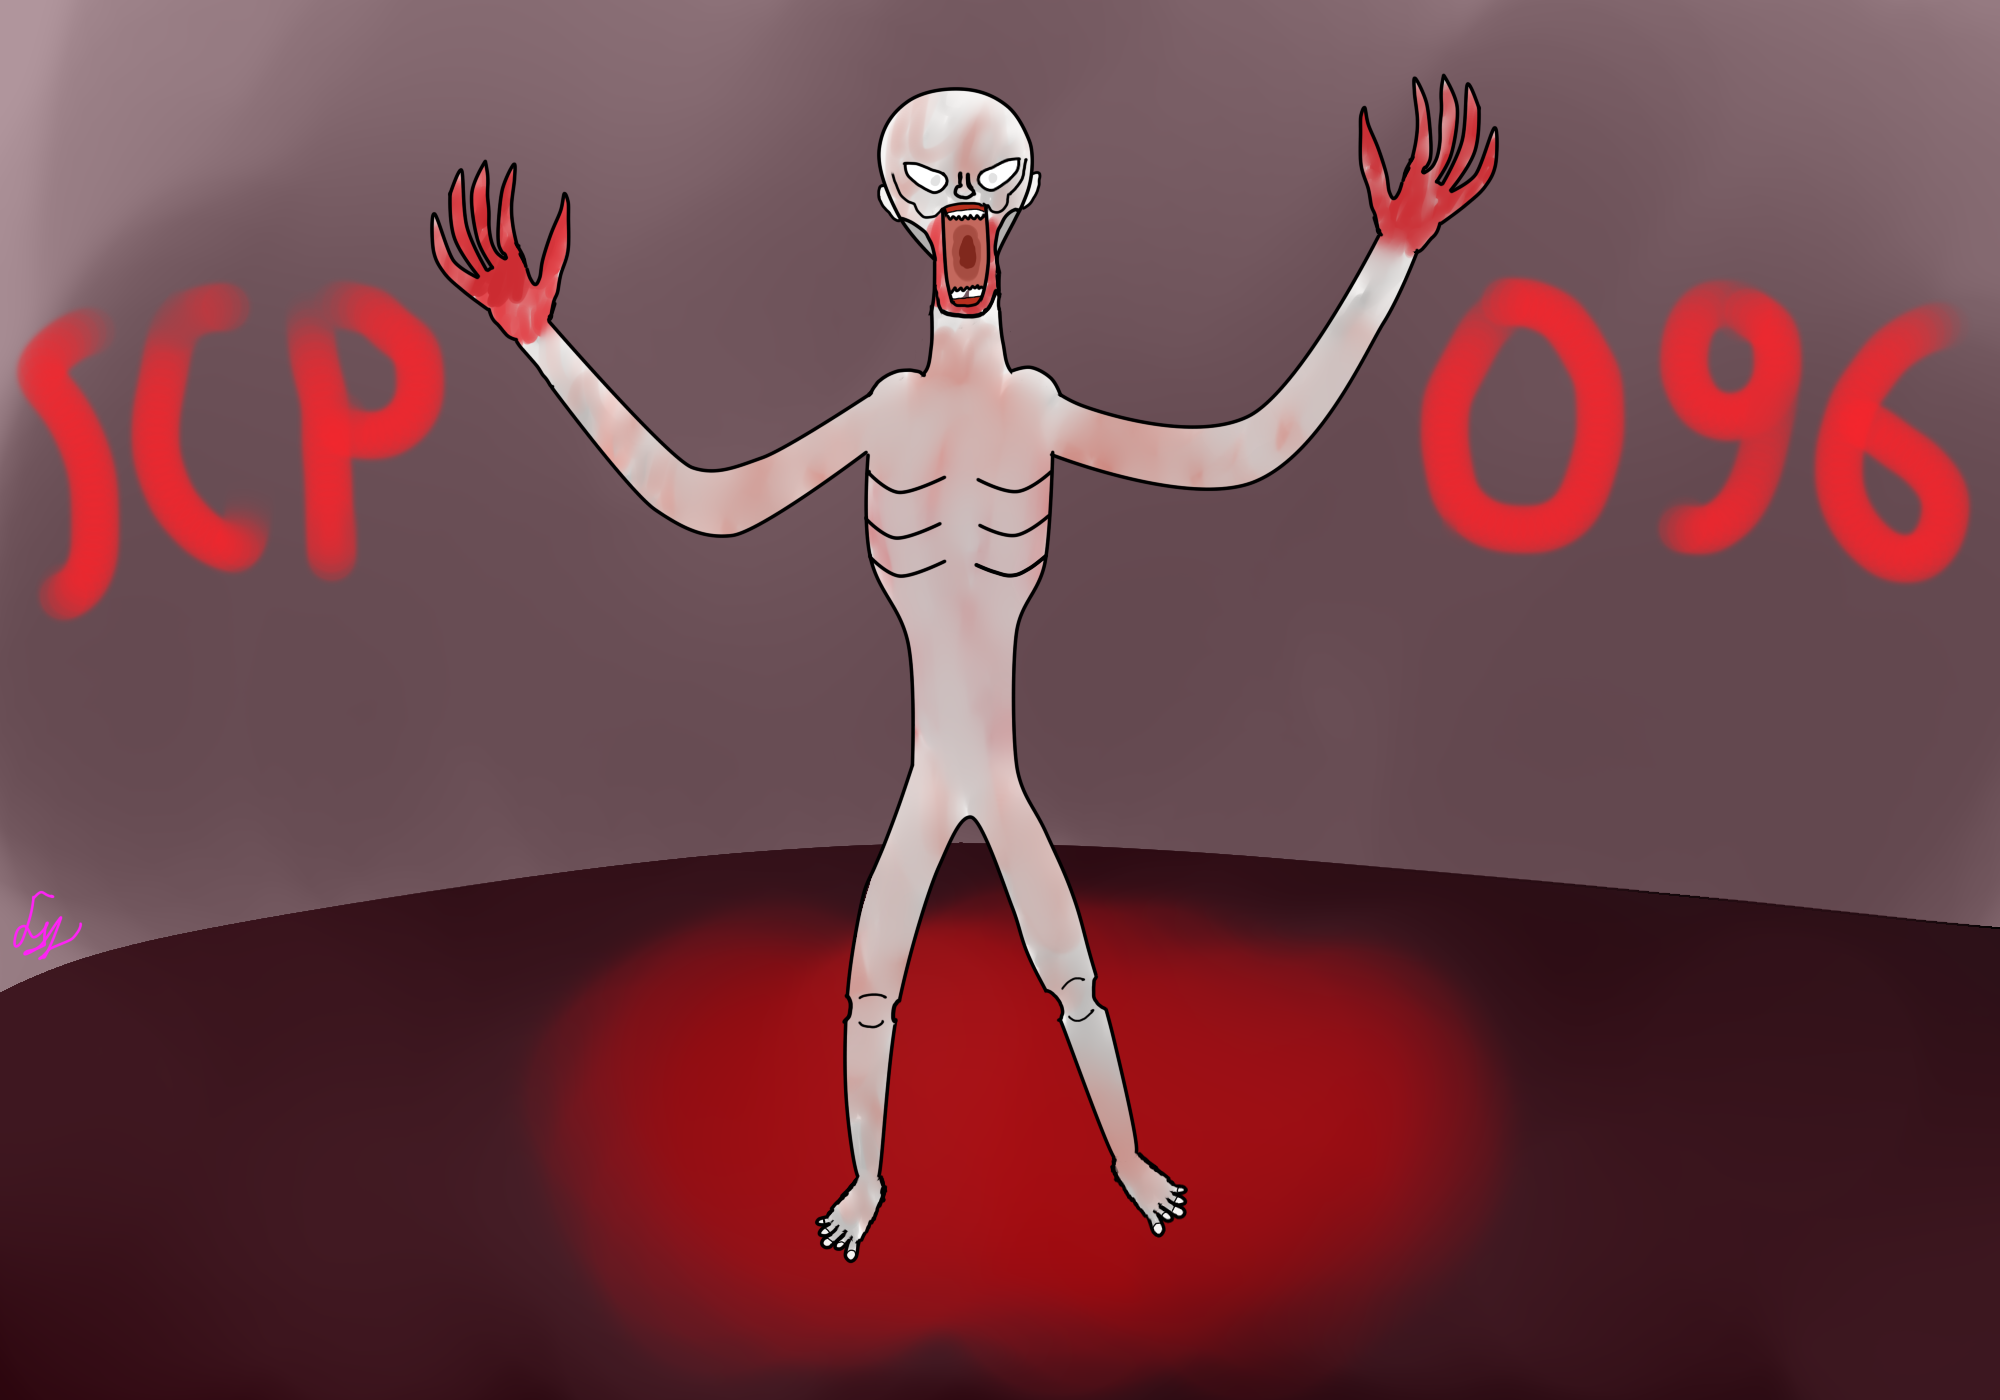 Scp-096 by Dowad on DeviantArt